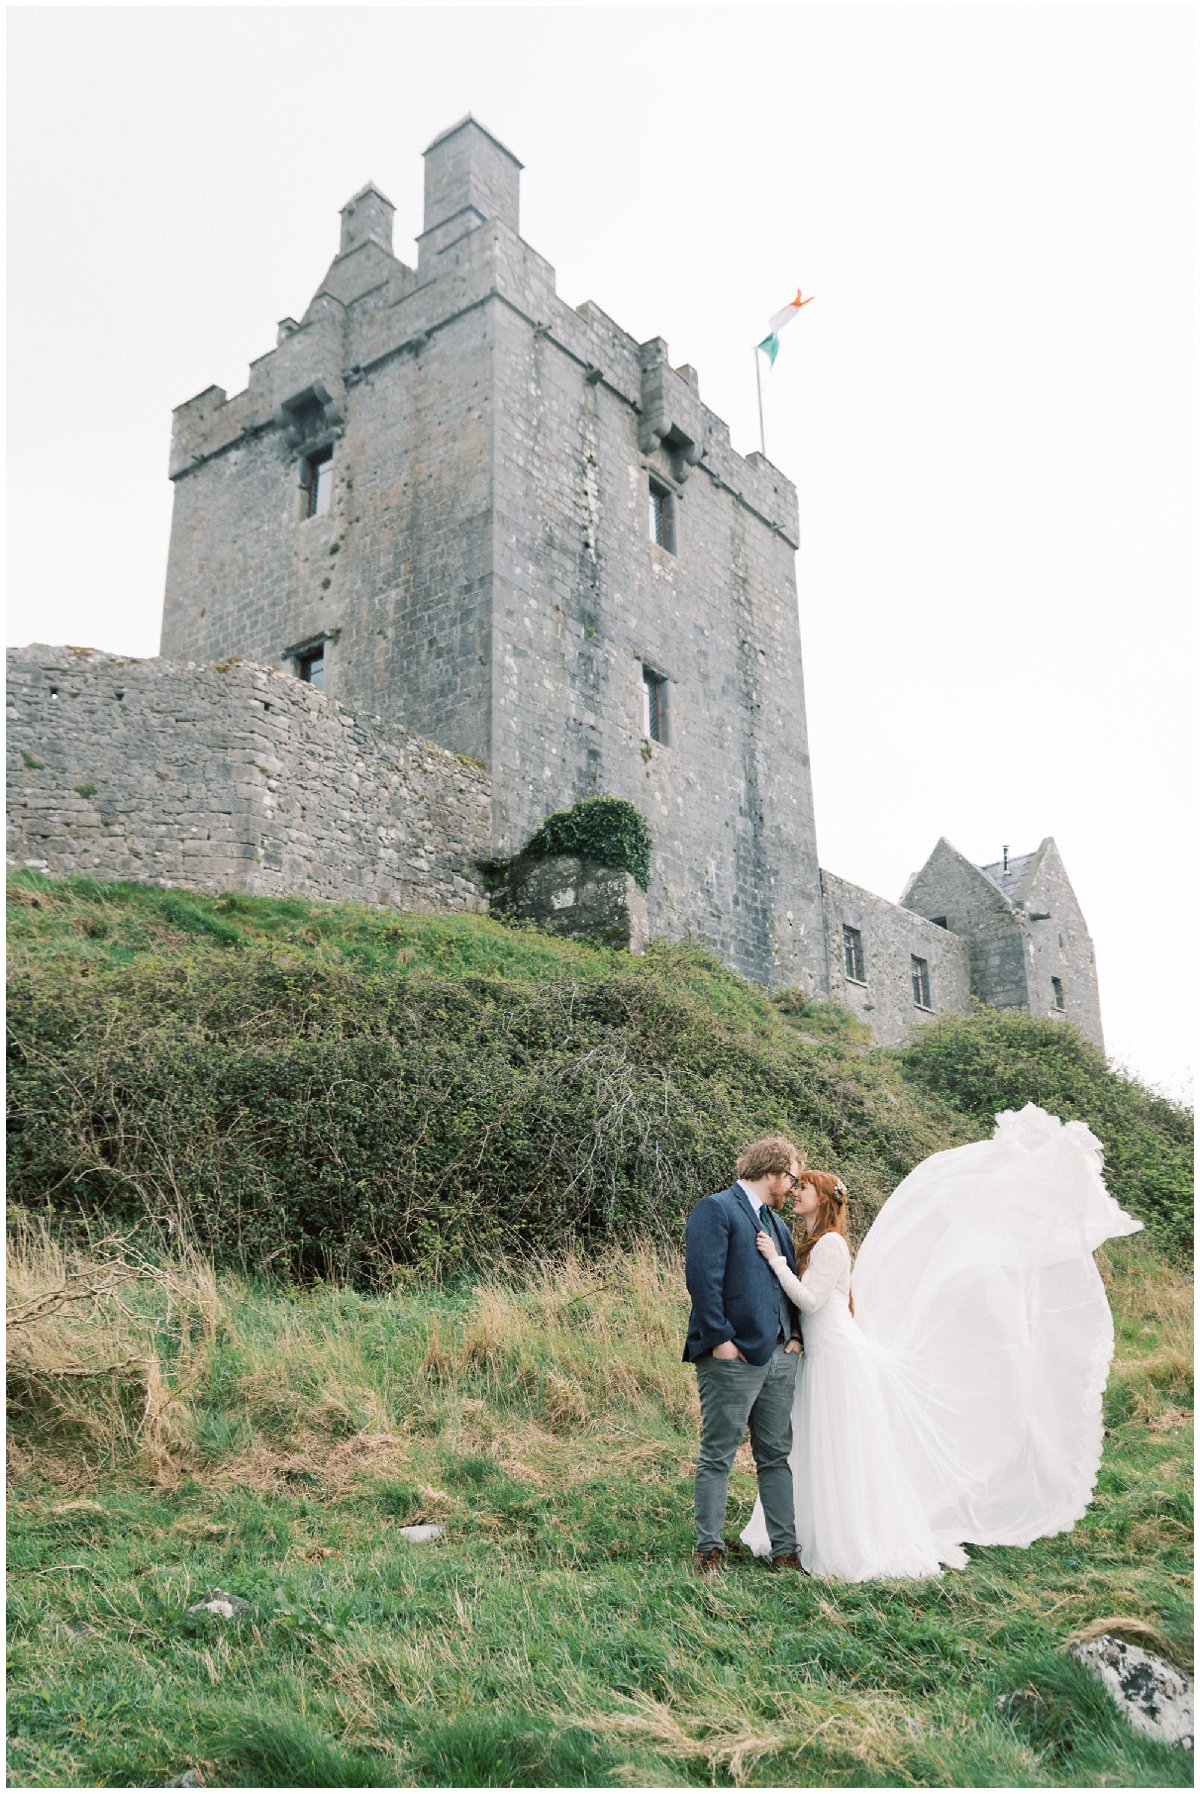 Couple at Dunguaire Castle in Ireland